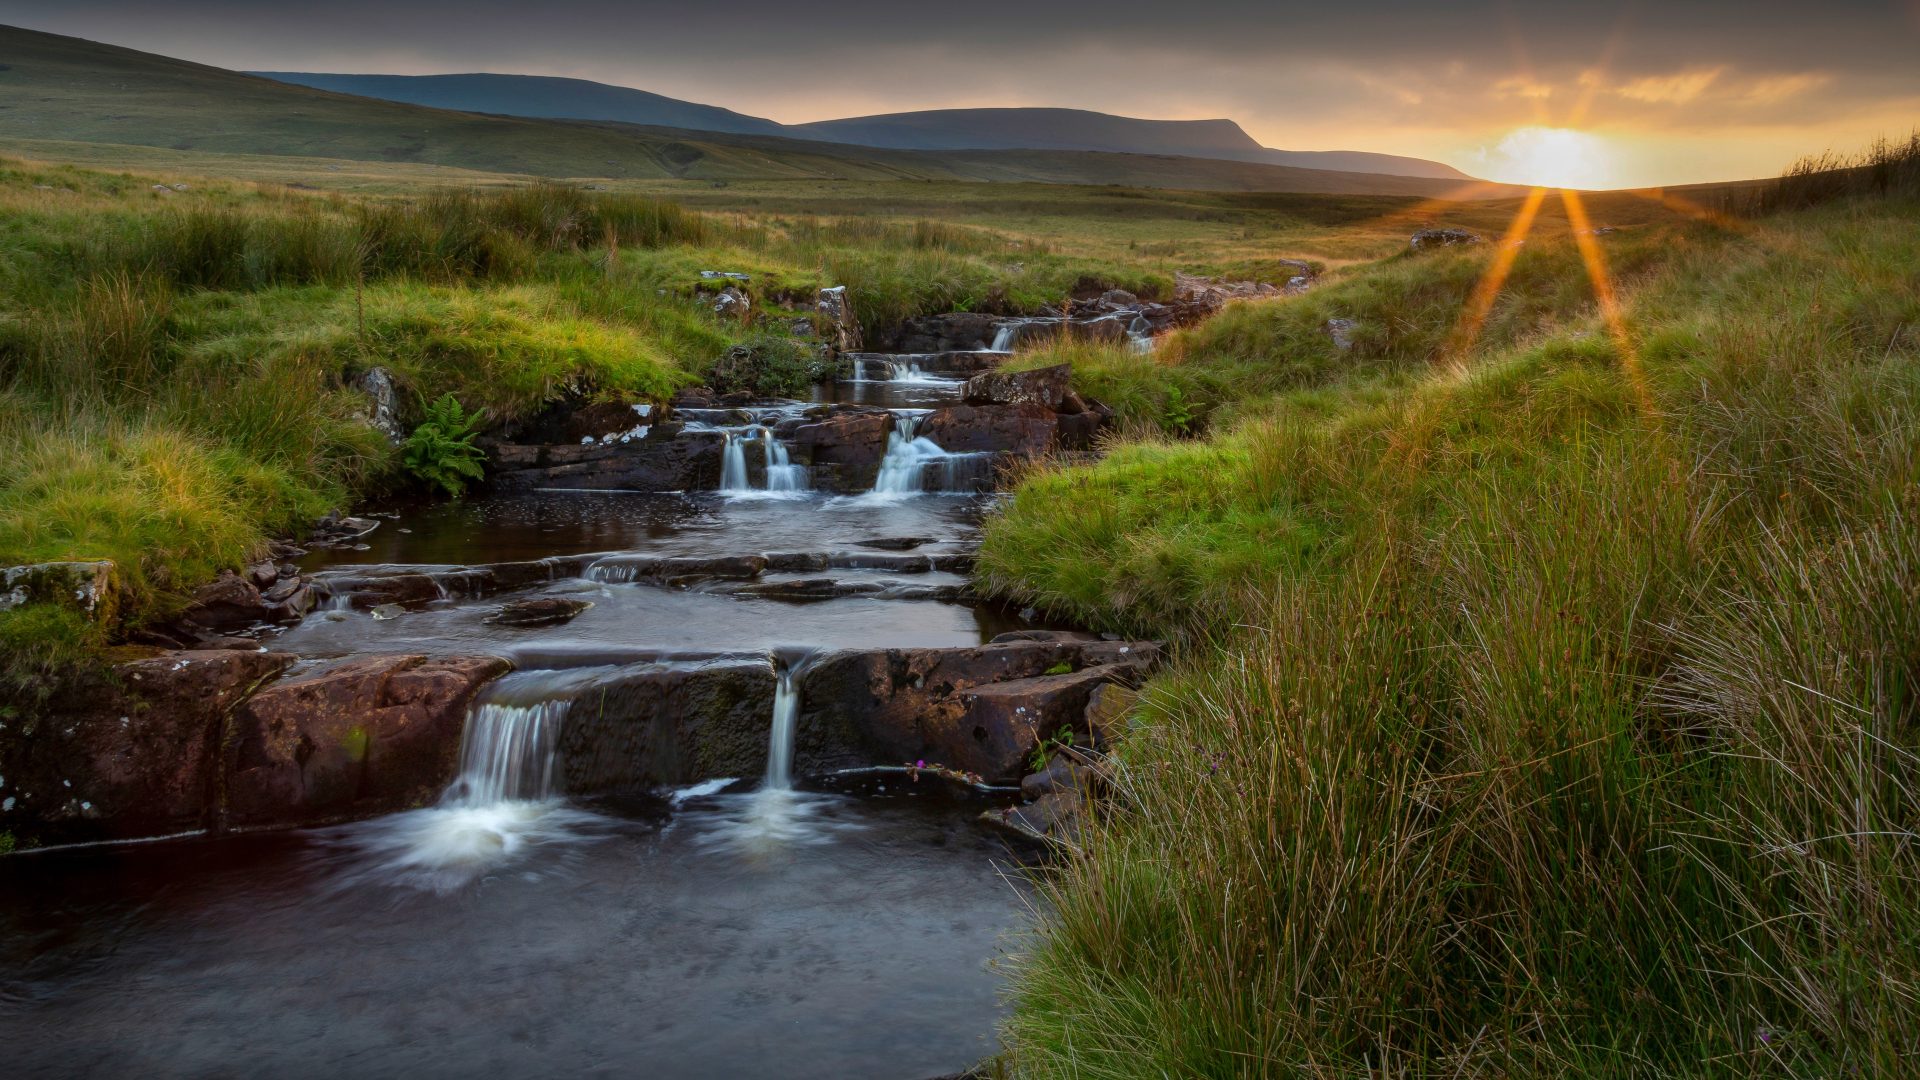 Sunset near the source of the river Tawe in the Brecon Beacons, South Wales, UK